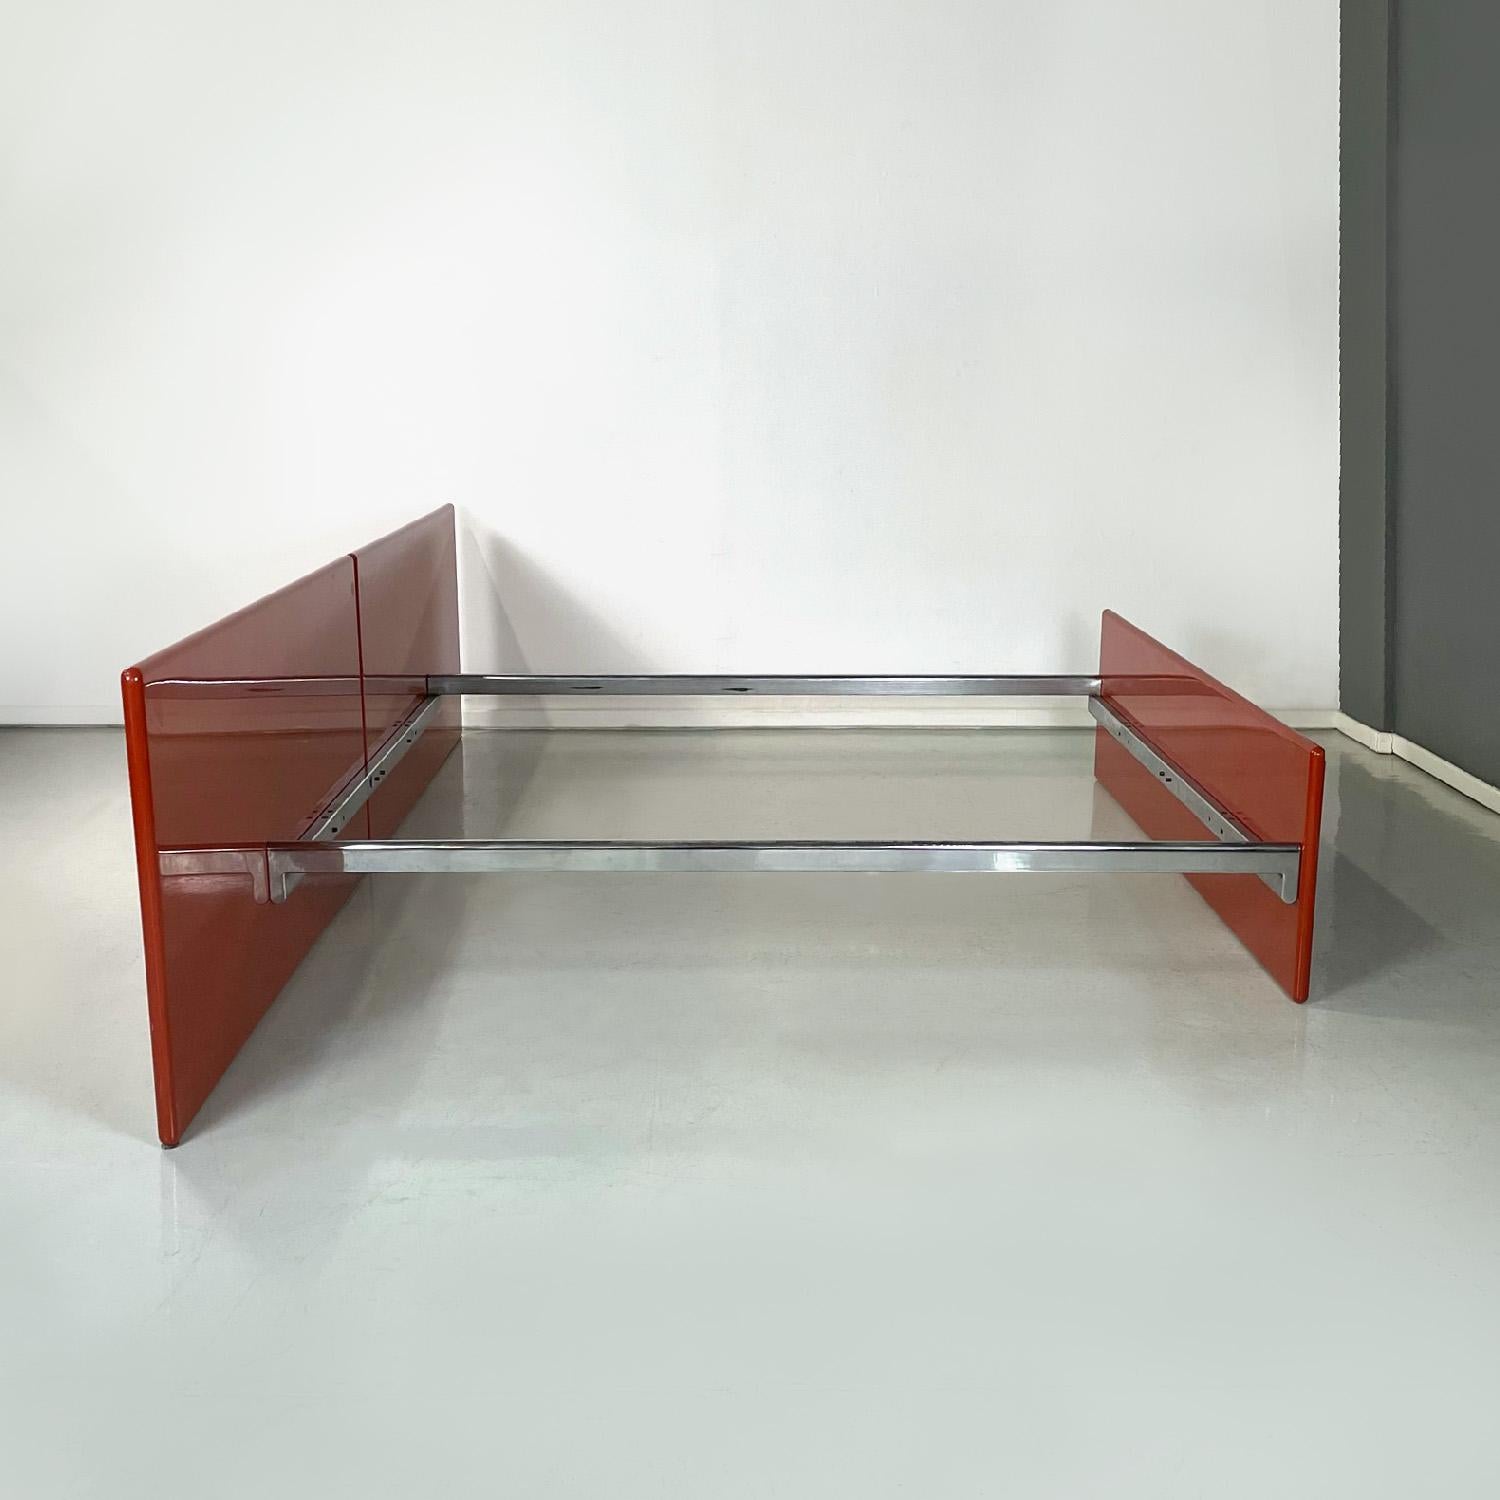 Italian modern red lacquered wood metal bed by Takahama for Simon Gavina, 1970s For Sale 10